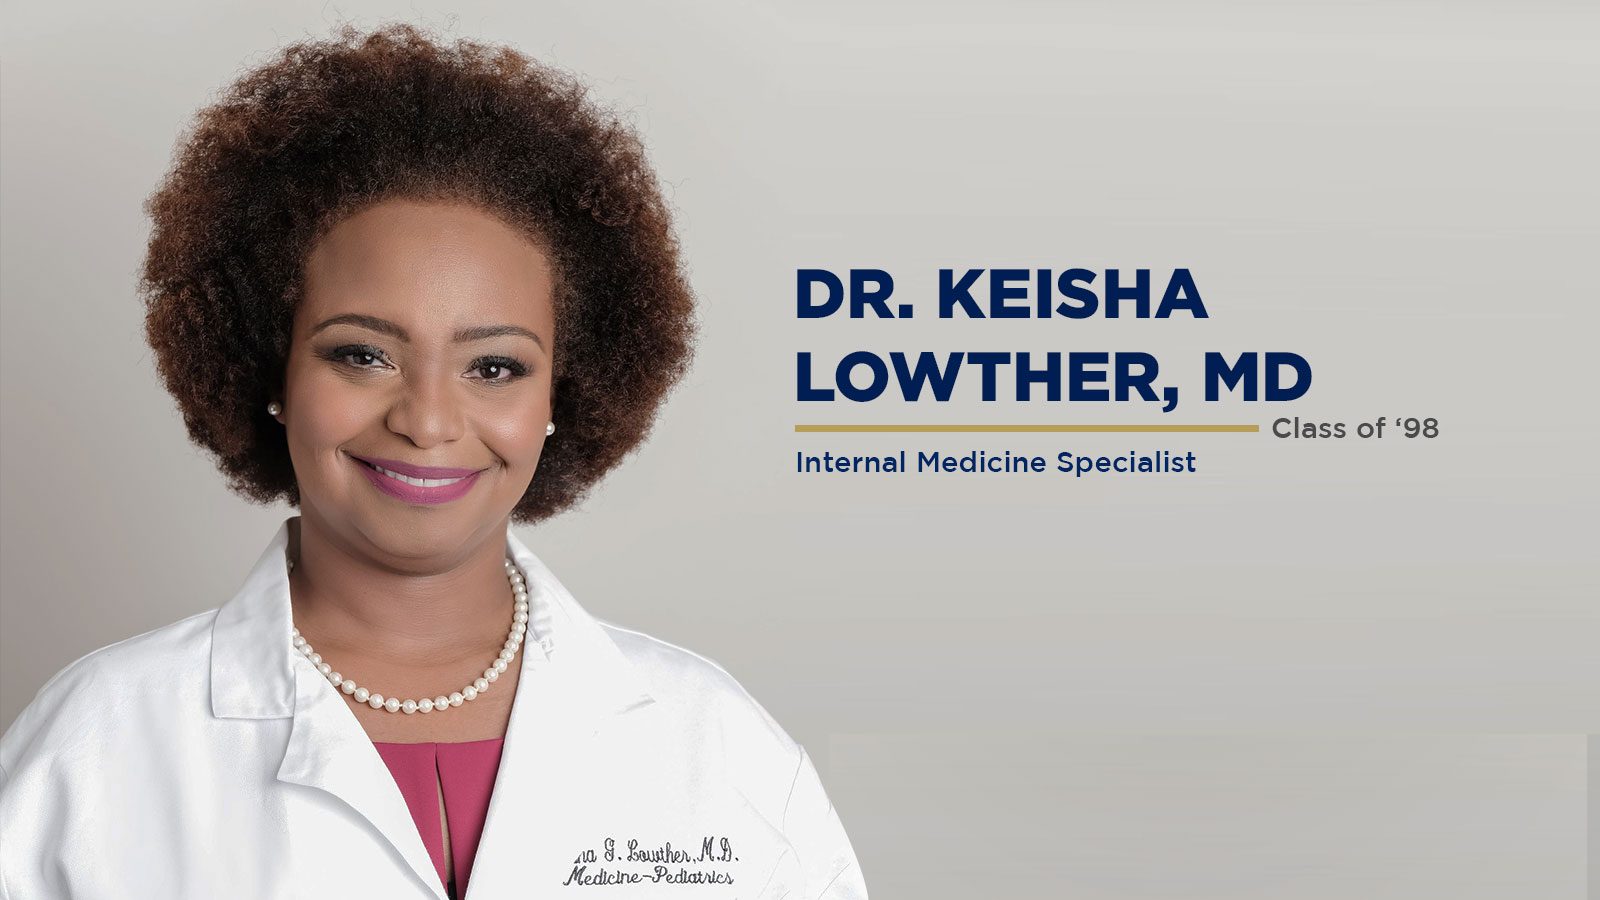 Dr. Keisha Lowther, MD